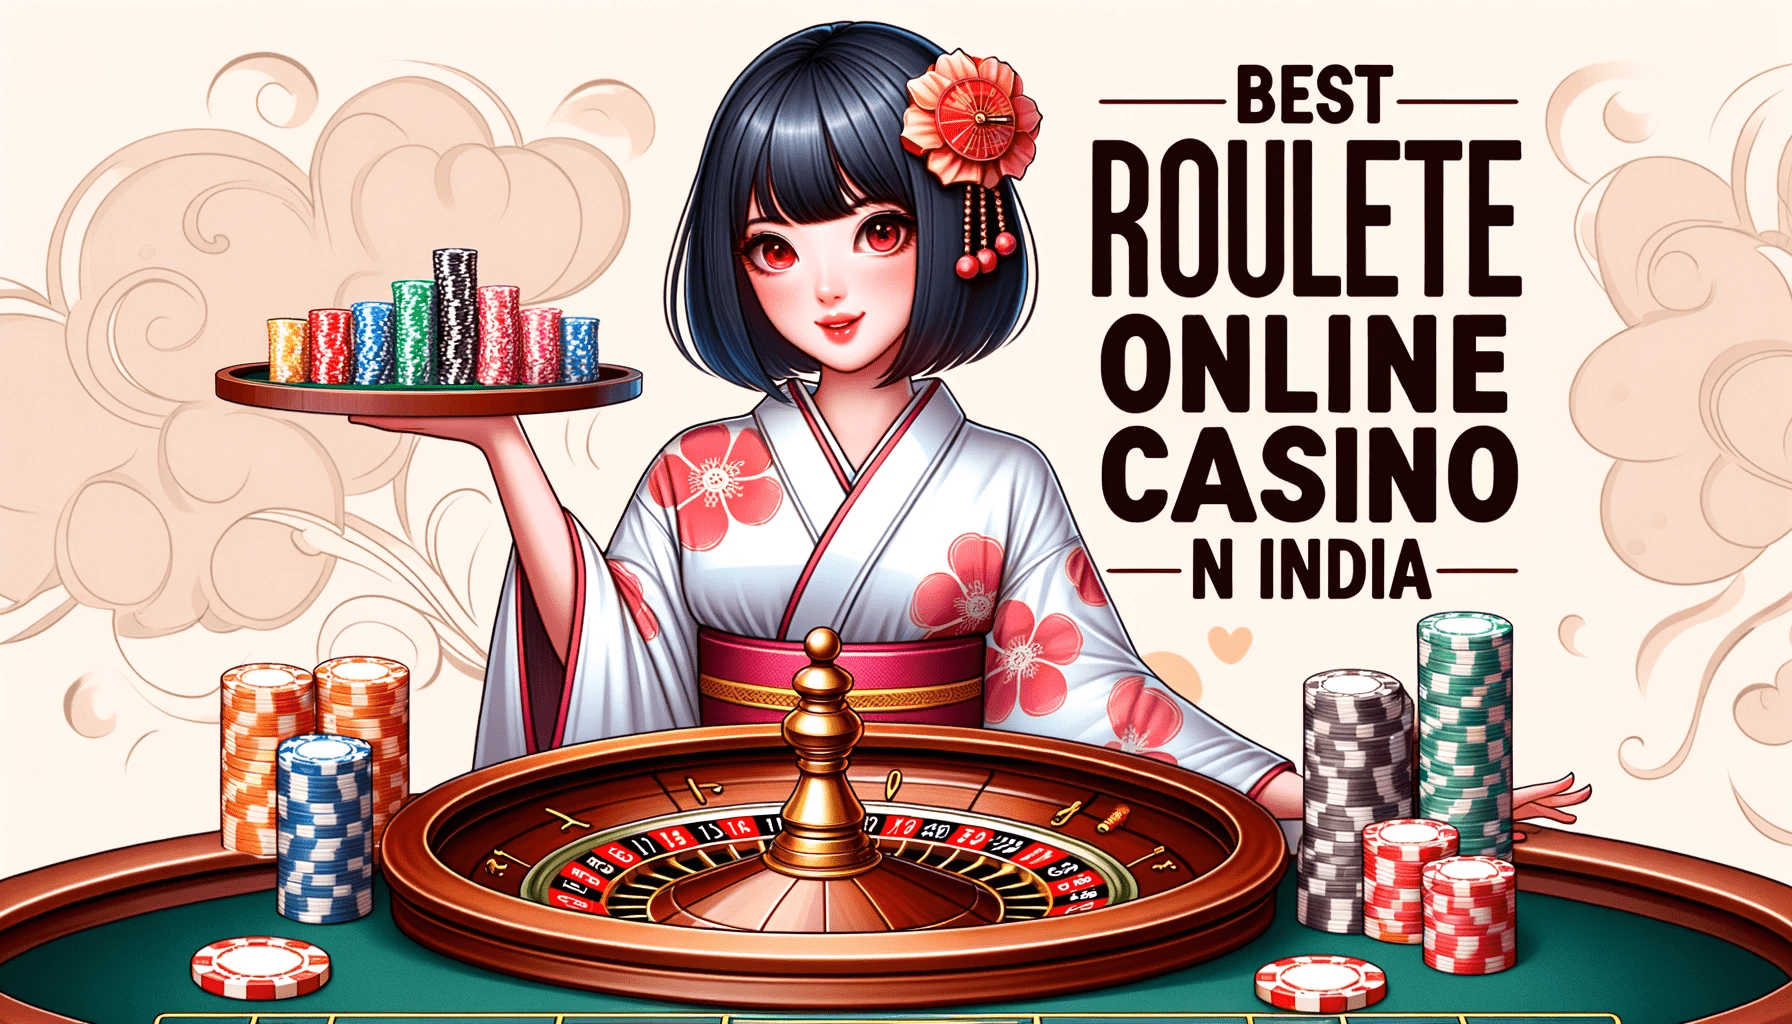 How To Win Friends And Influence People with Comparing online casino platforms in India: Which is better?